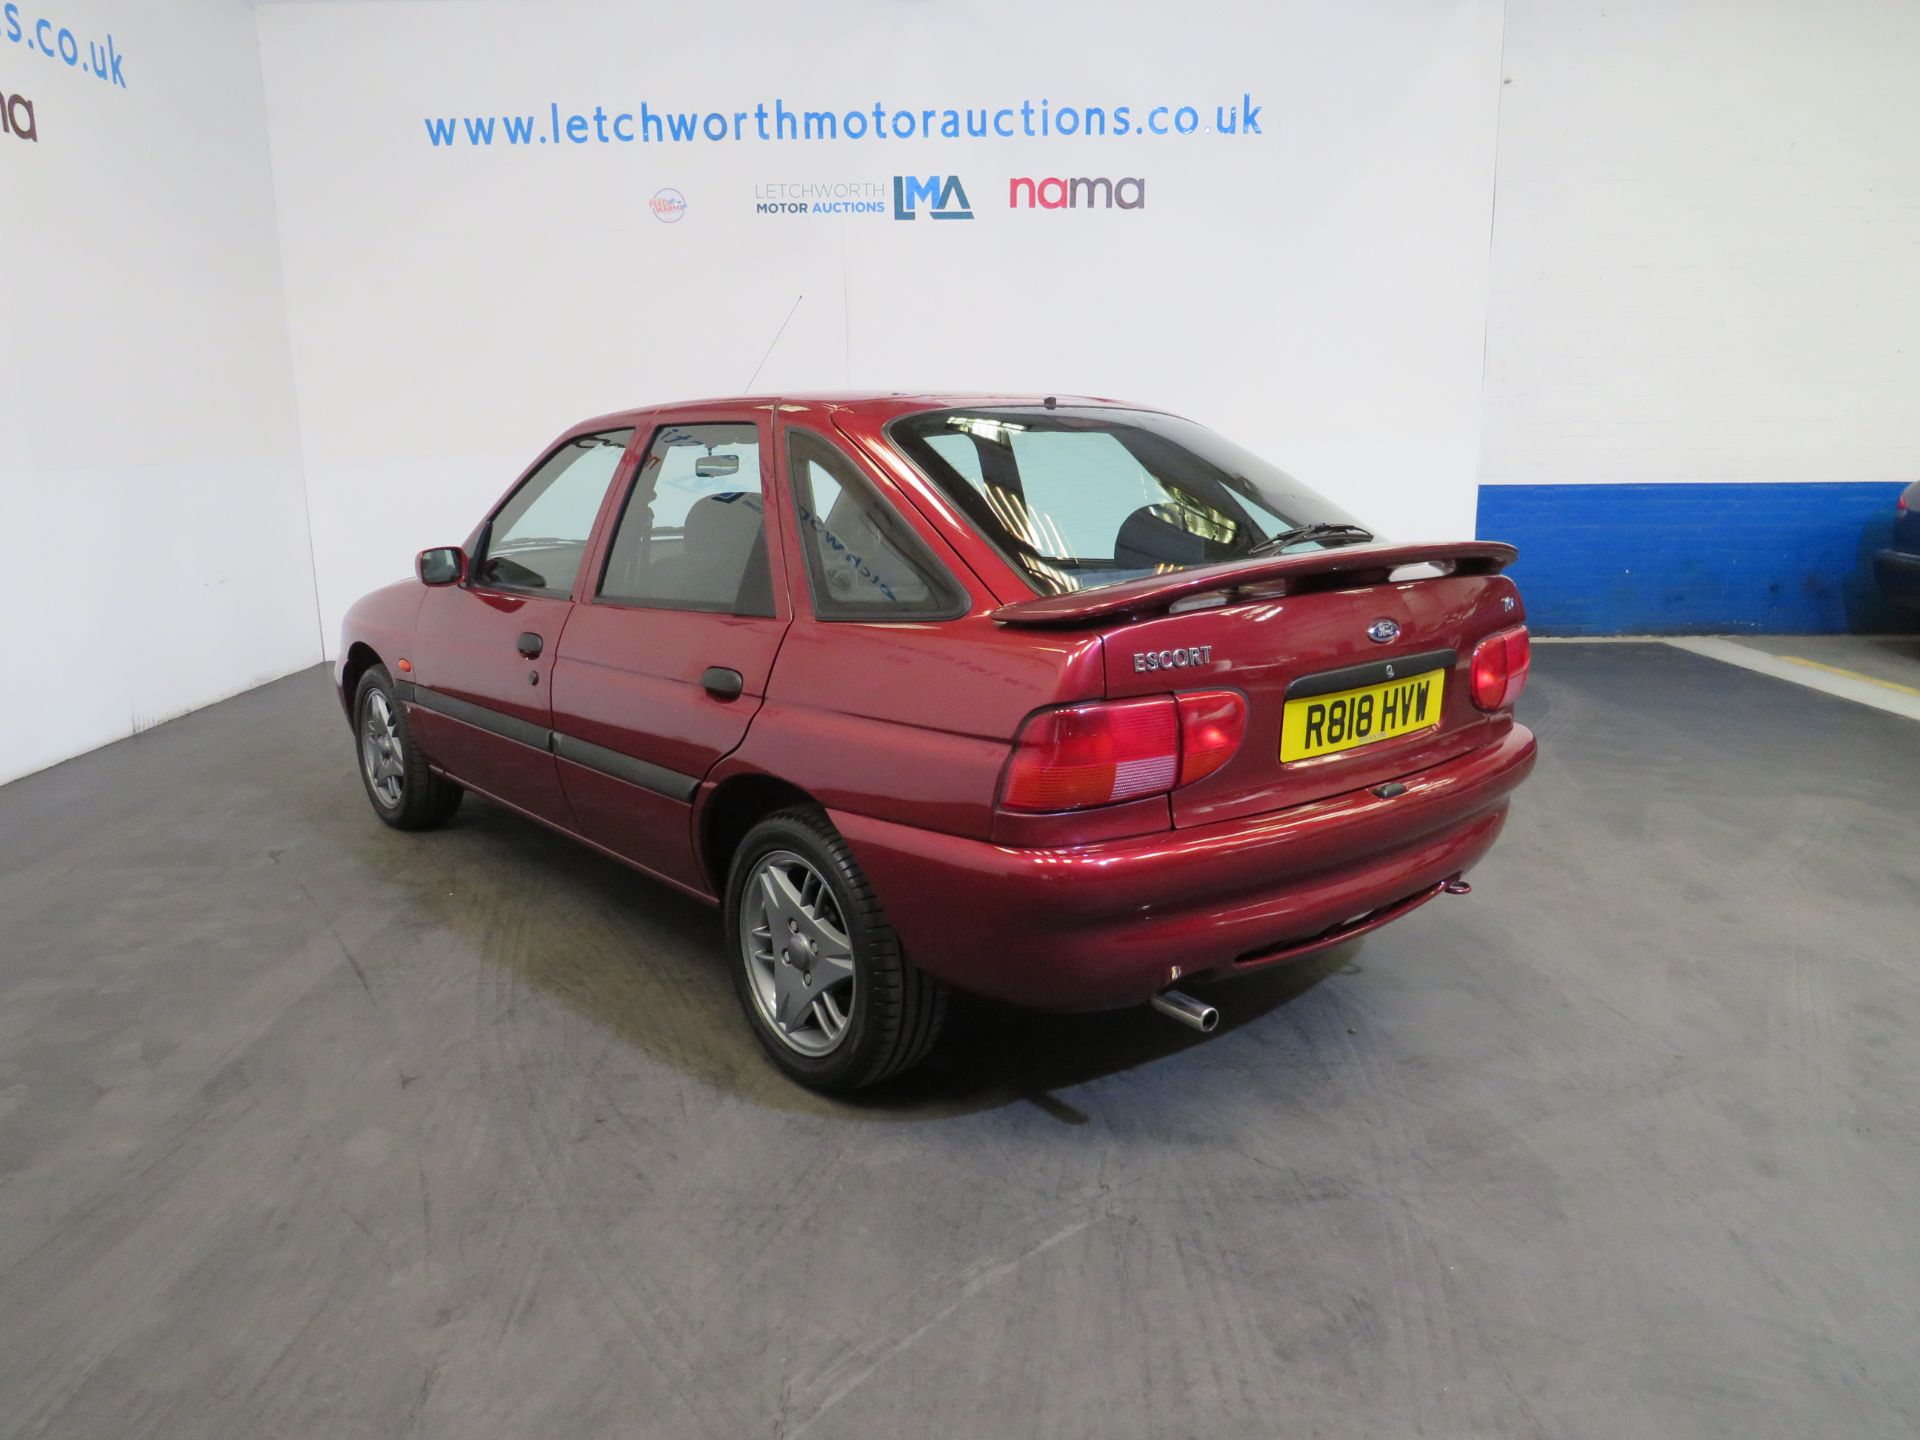 1998 Ford Escort SI -1597cc - Image 4 of 15